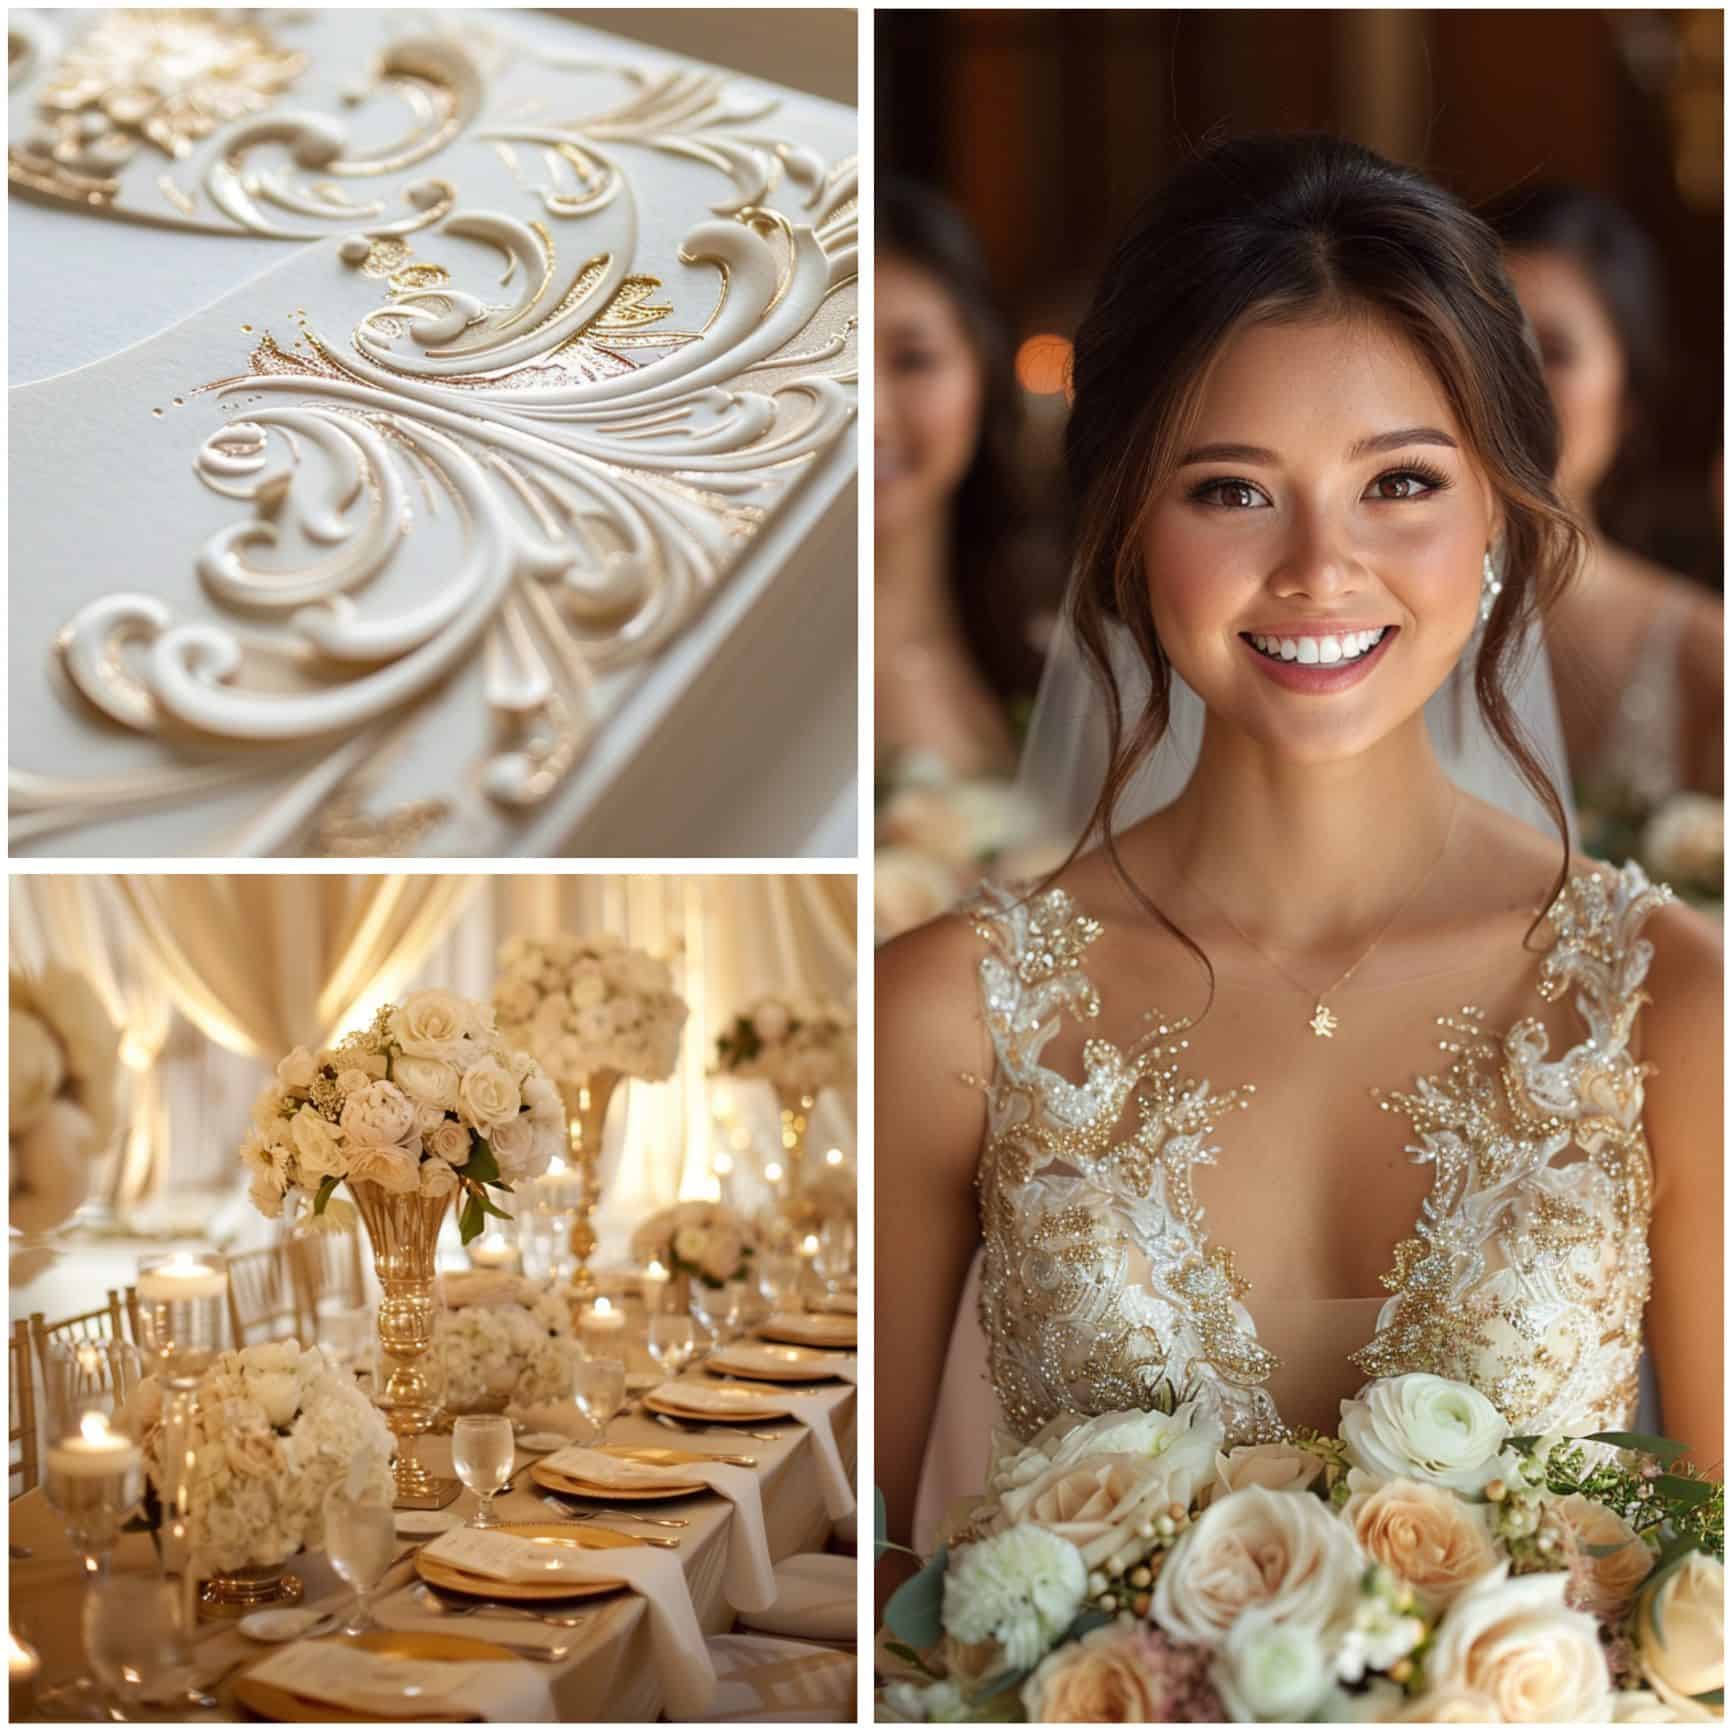 white and gold wedding theme ideas for personalization